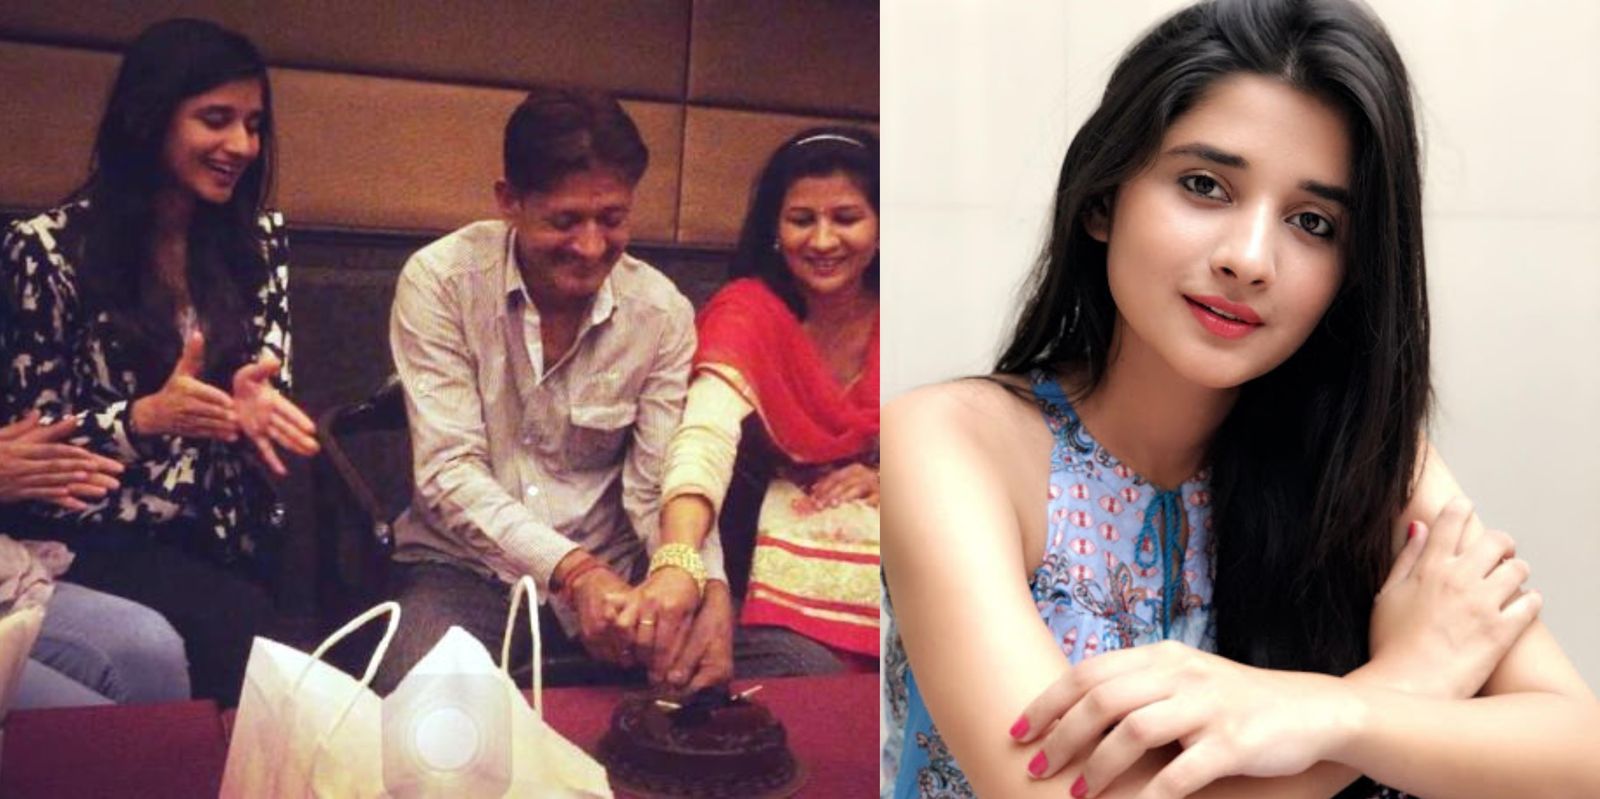 TV Actress Kanika Mann’s Father Told Her To Quit Studies And Get Married, Is Now Supportive Of Her Career Choice